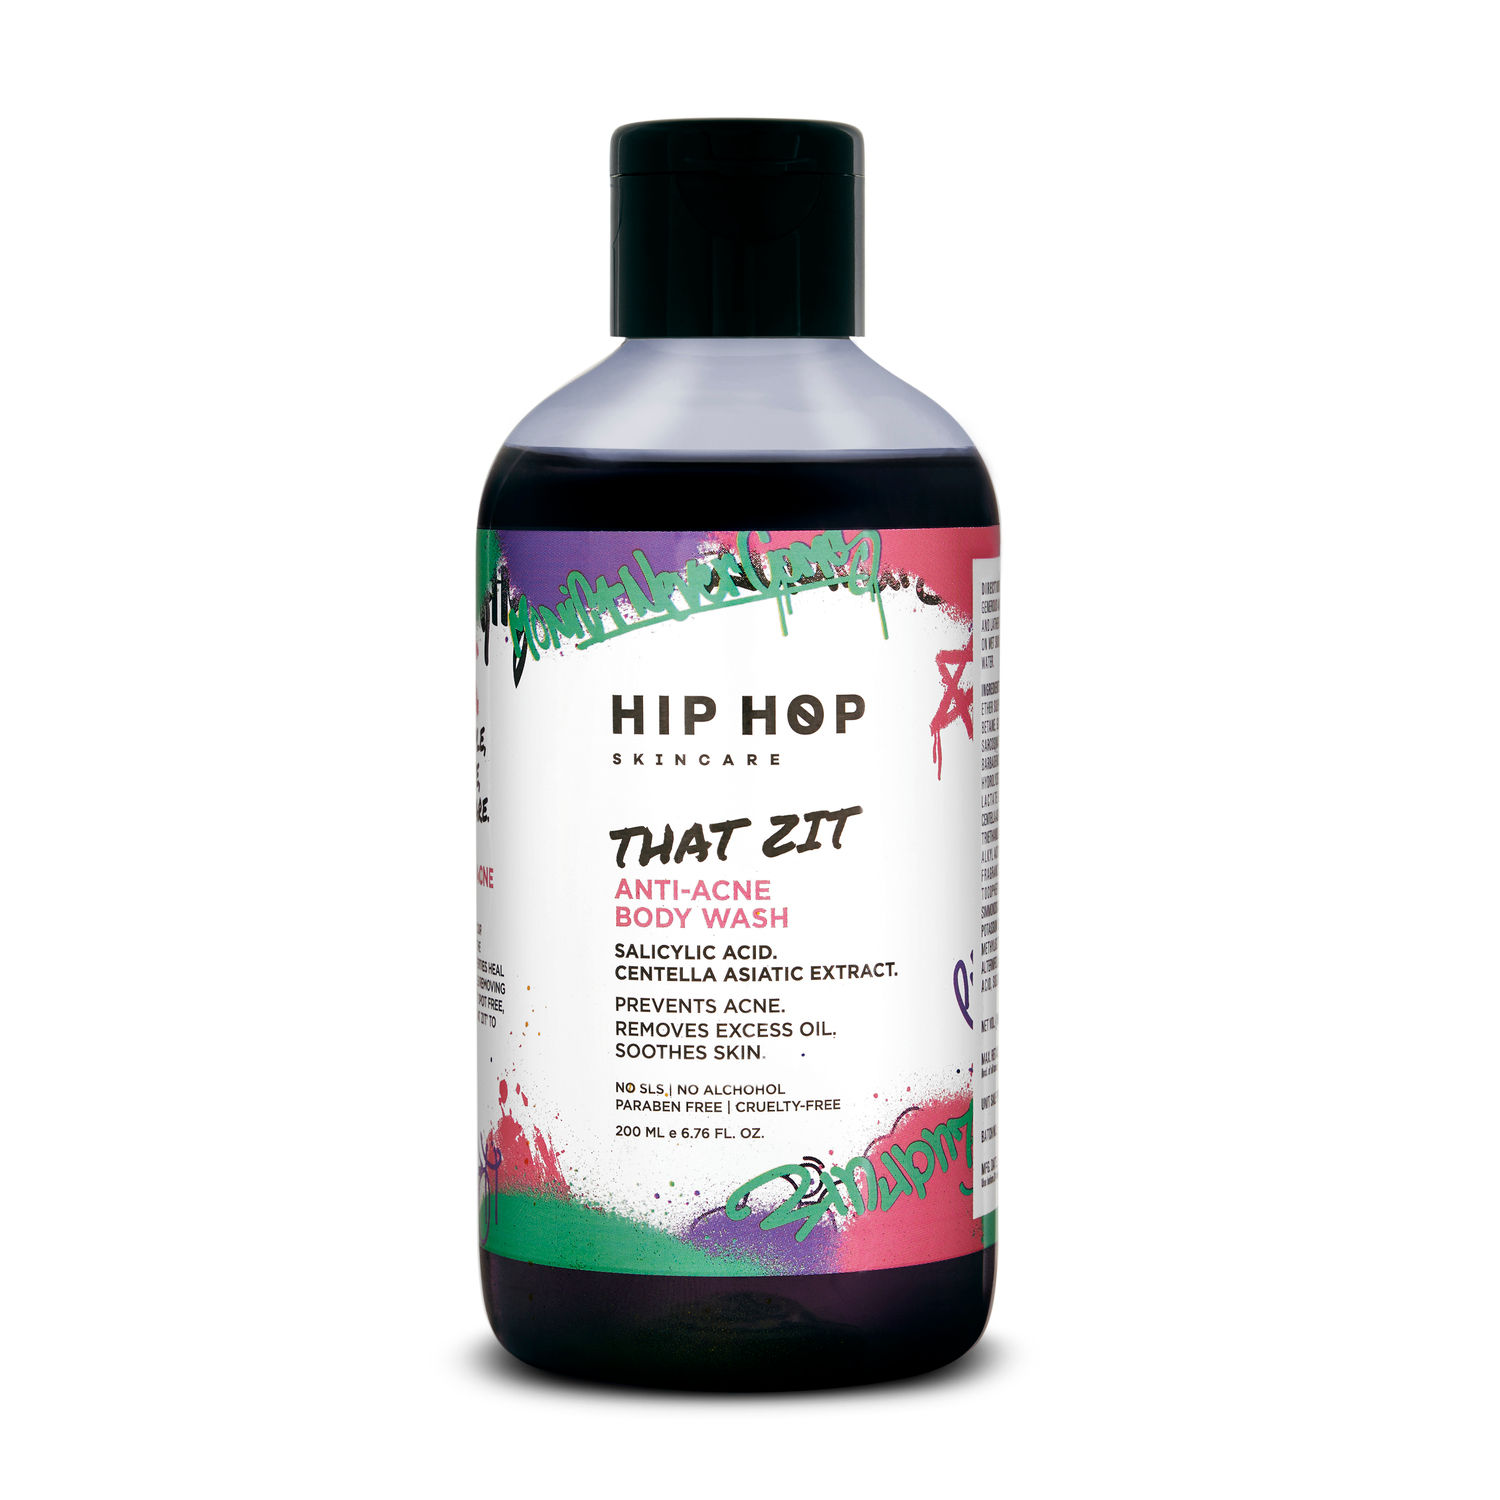 Buy HipHop Skincare That Zit Anti-Acne Body Wash Gets Rid of Body Acne & Pigmentation. Enriched with Salicylic Acid, Oatmeal & Vitamin E. Suitable for all skin types, including Oily - Acne Prone Skin. For Men & Women 200 ml - Purplle